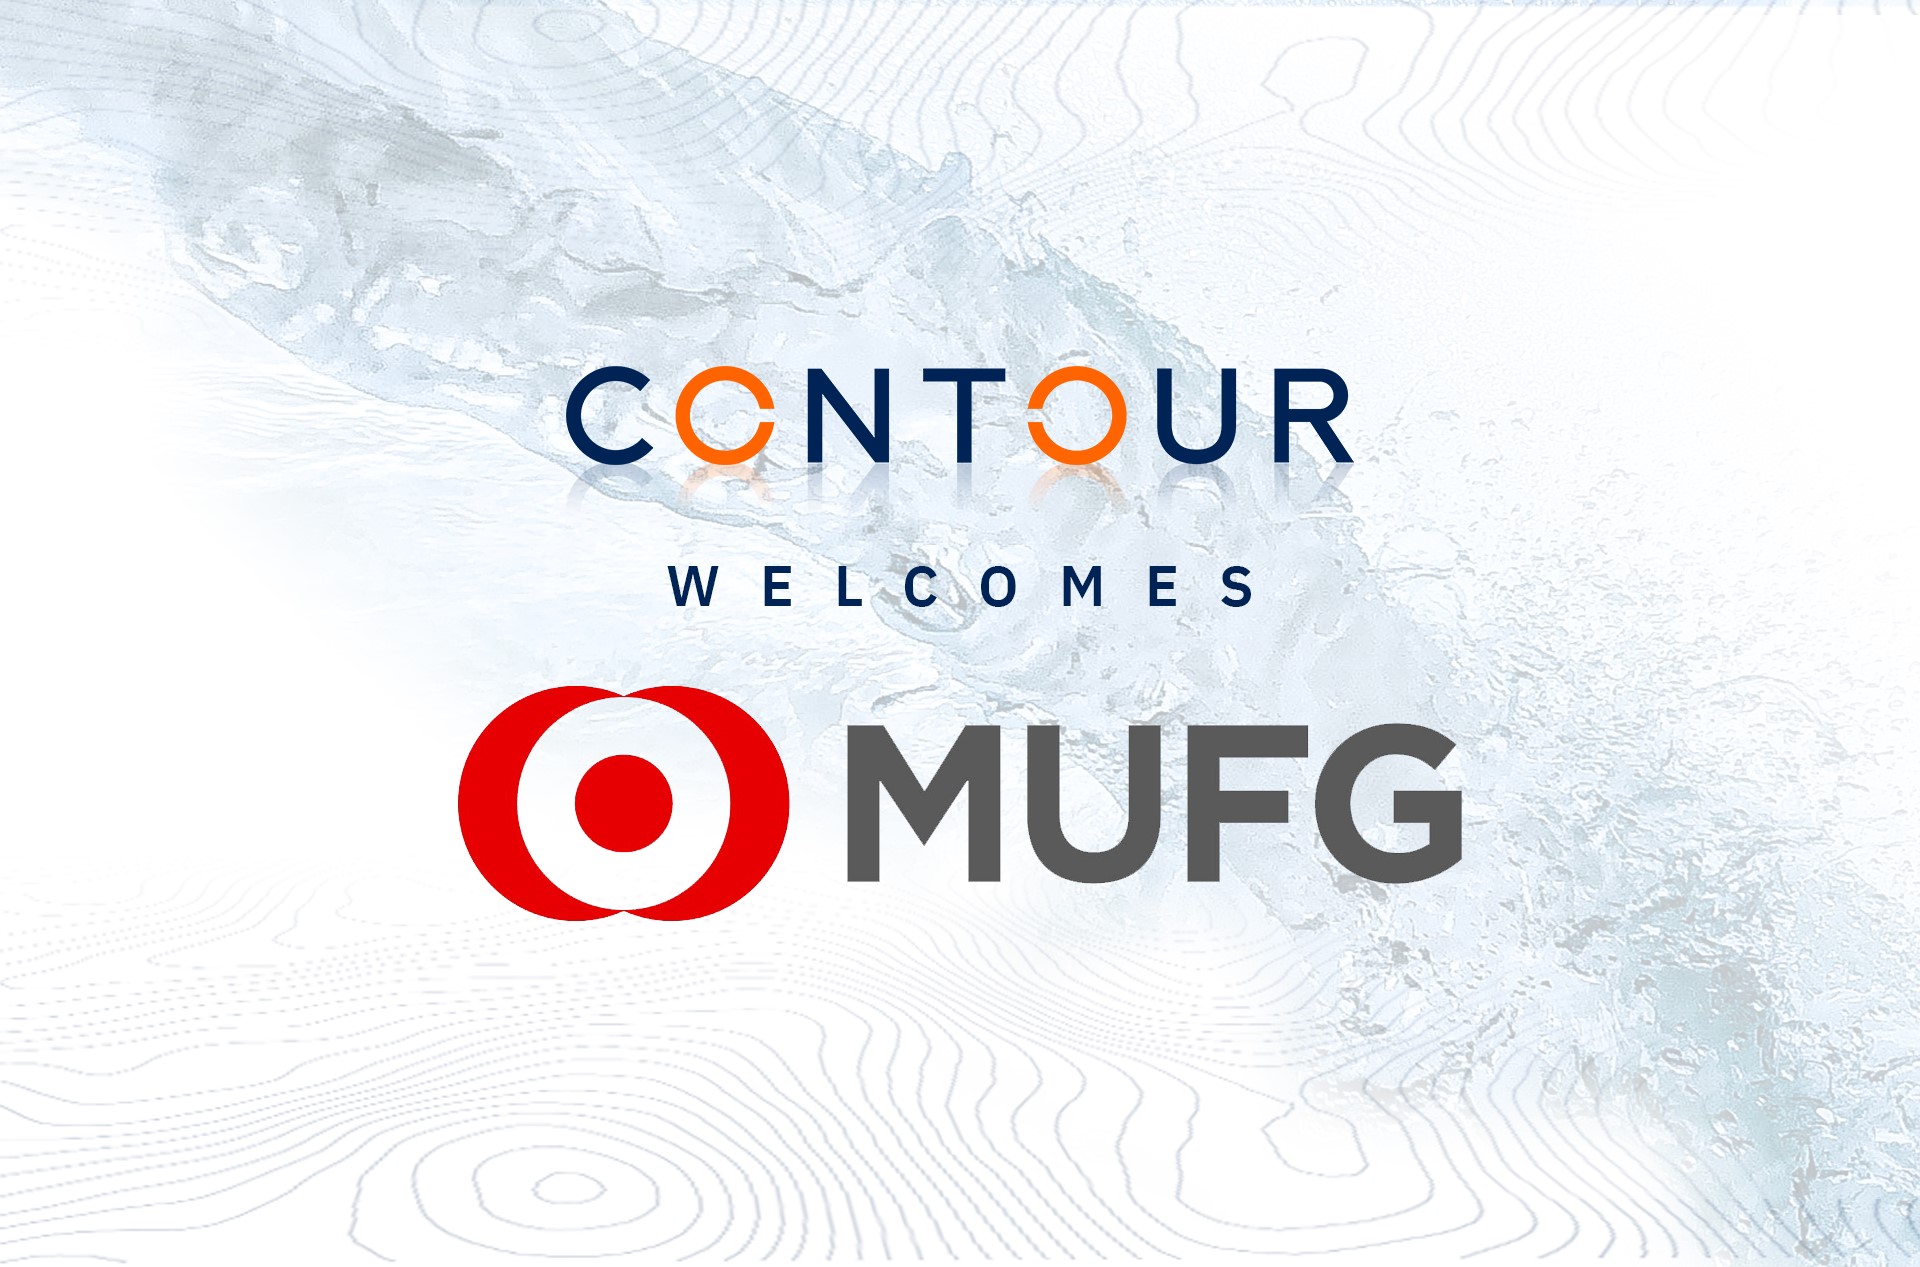 Japan’s MUFG joins Contour’s growing network to digitally transform global trade